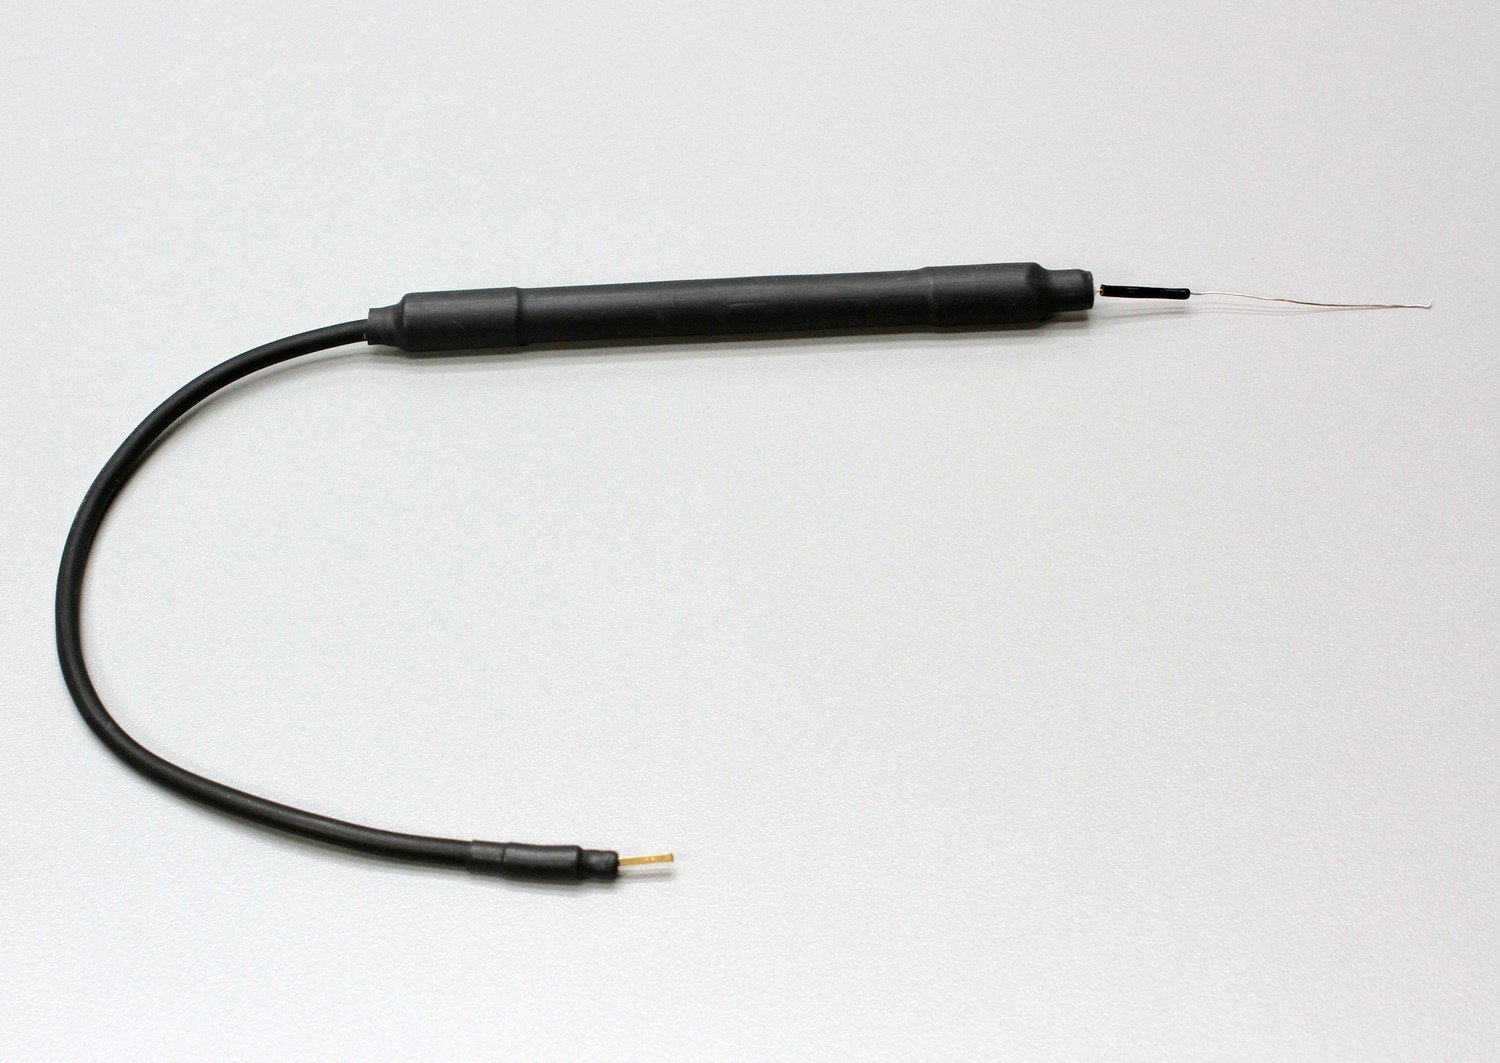 Monopolar extracellular hook electrode for use with NA-100 or NA-200 Neuro Amplifiers